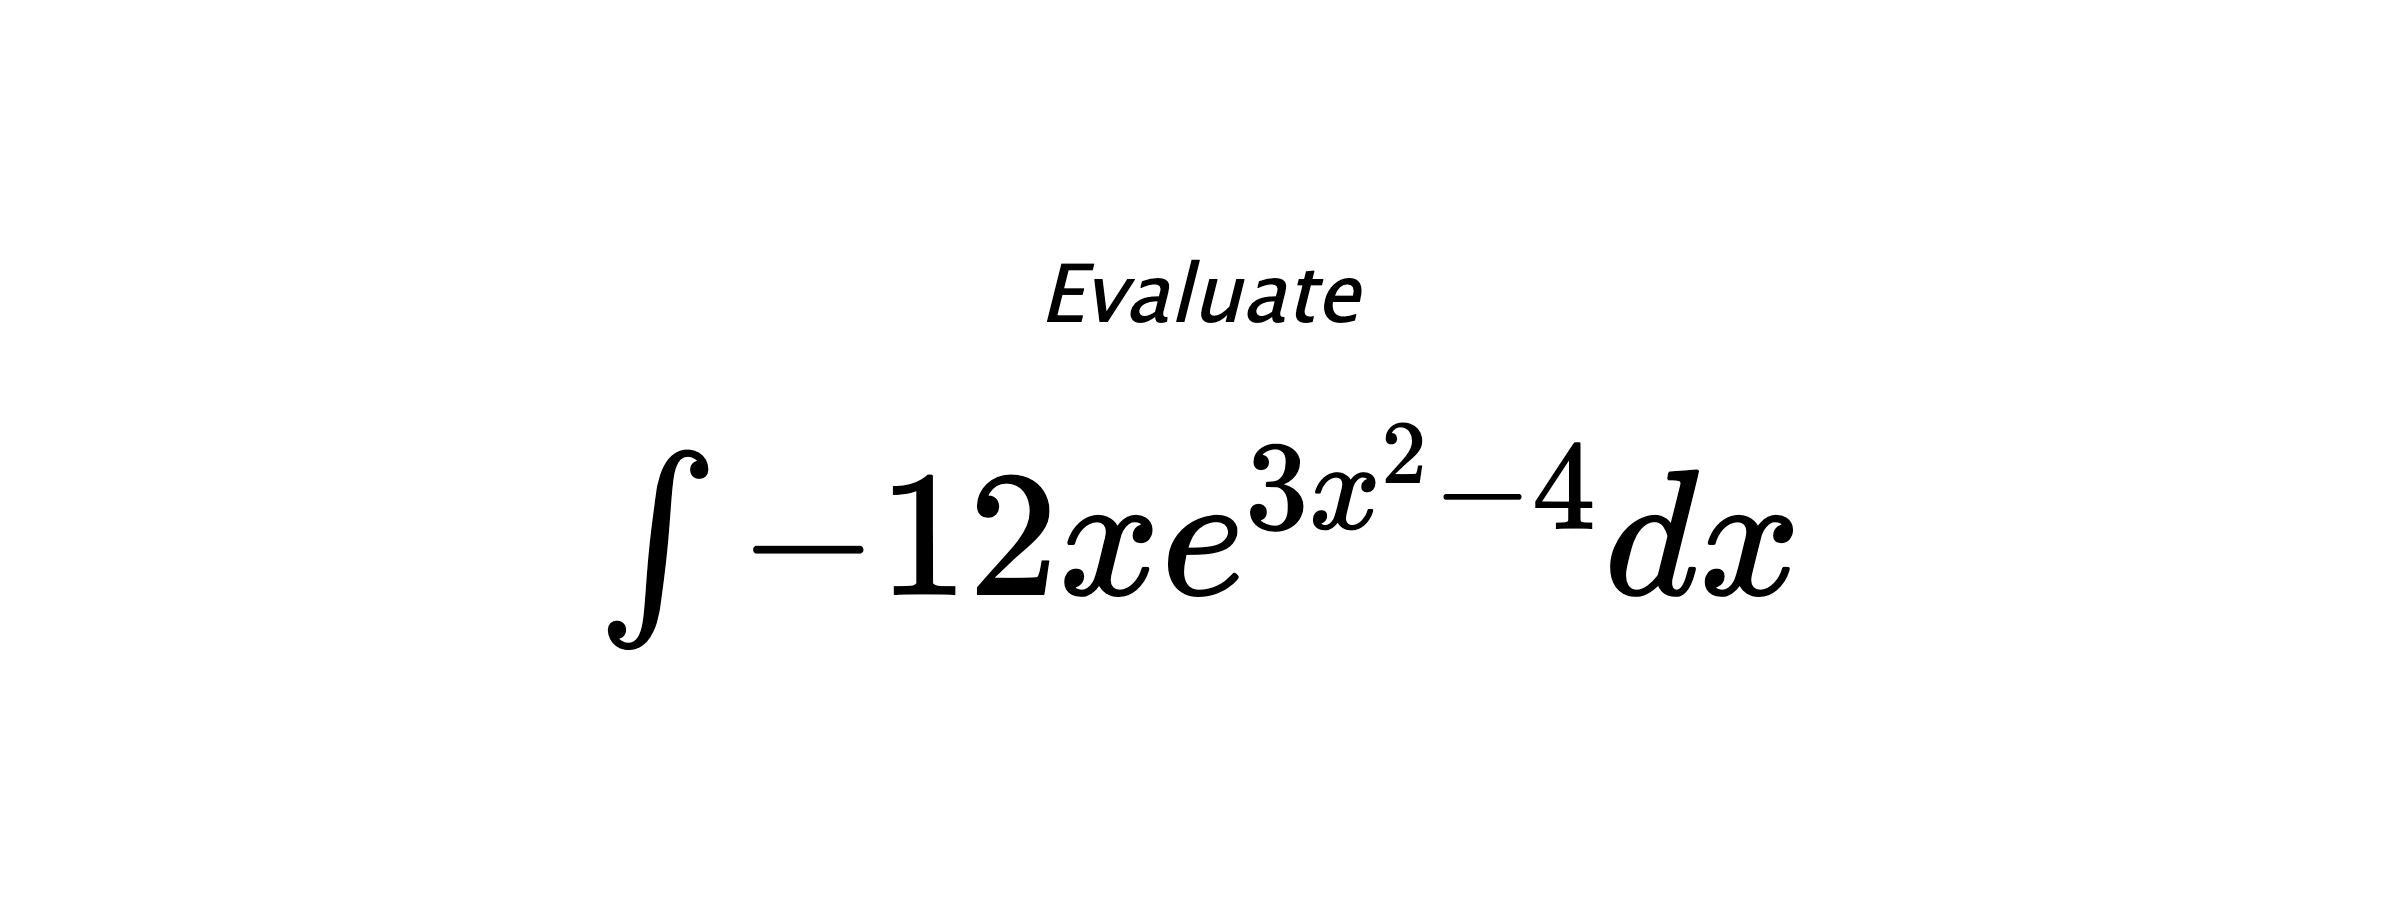 Evaluate $ \int -12xe^{3x^2-4}dx $